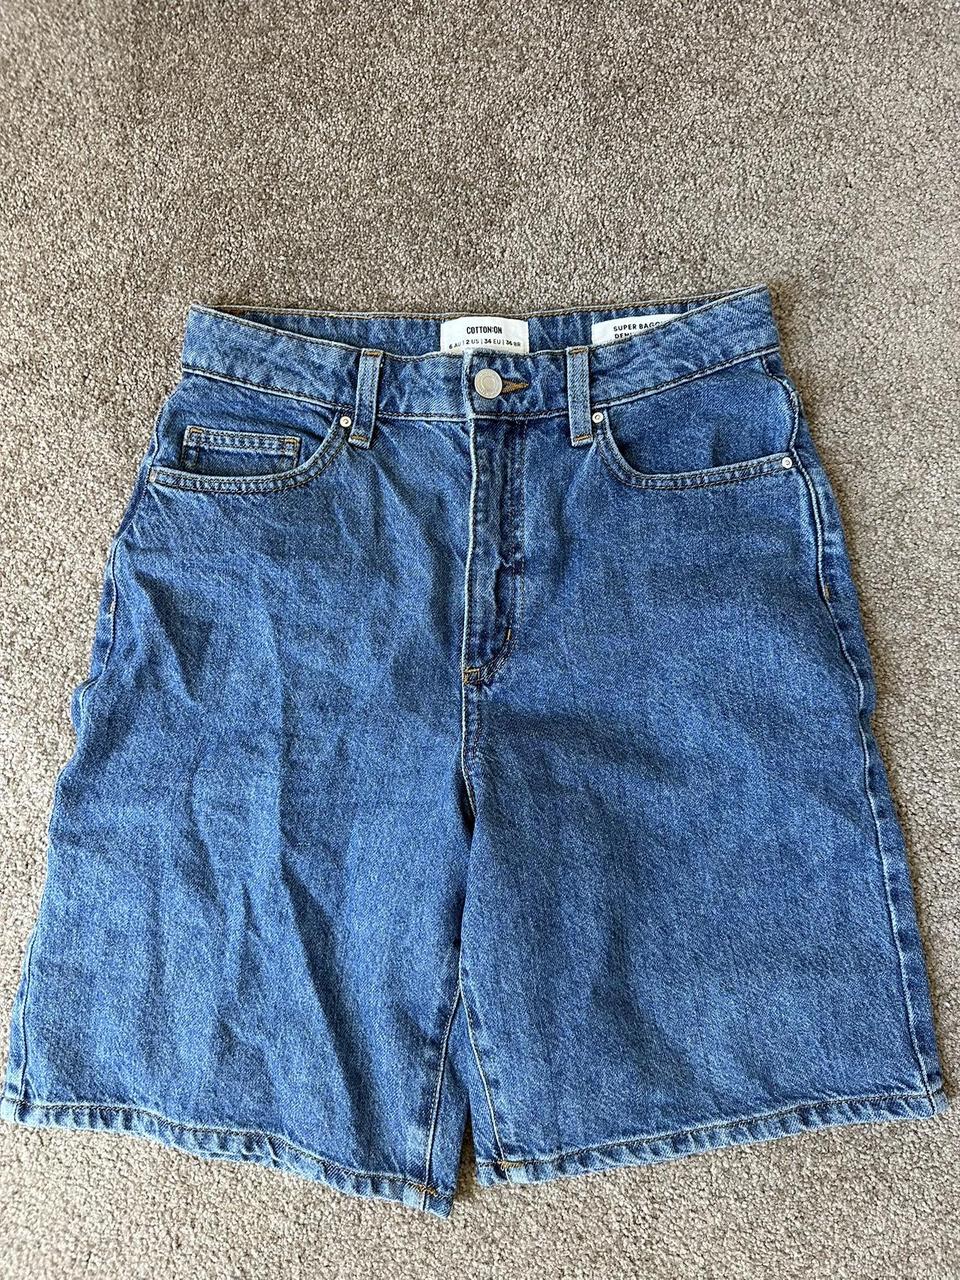 Cotton on jorts - size 6 - only worn once, perfect... - Depop